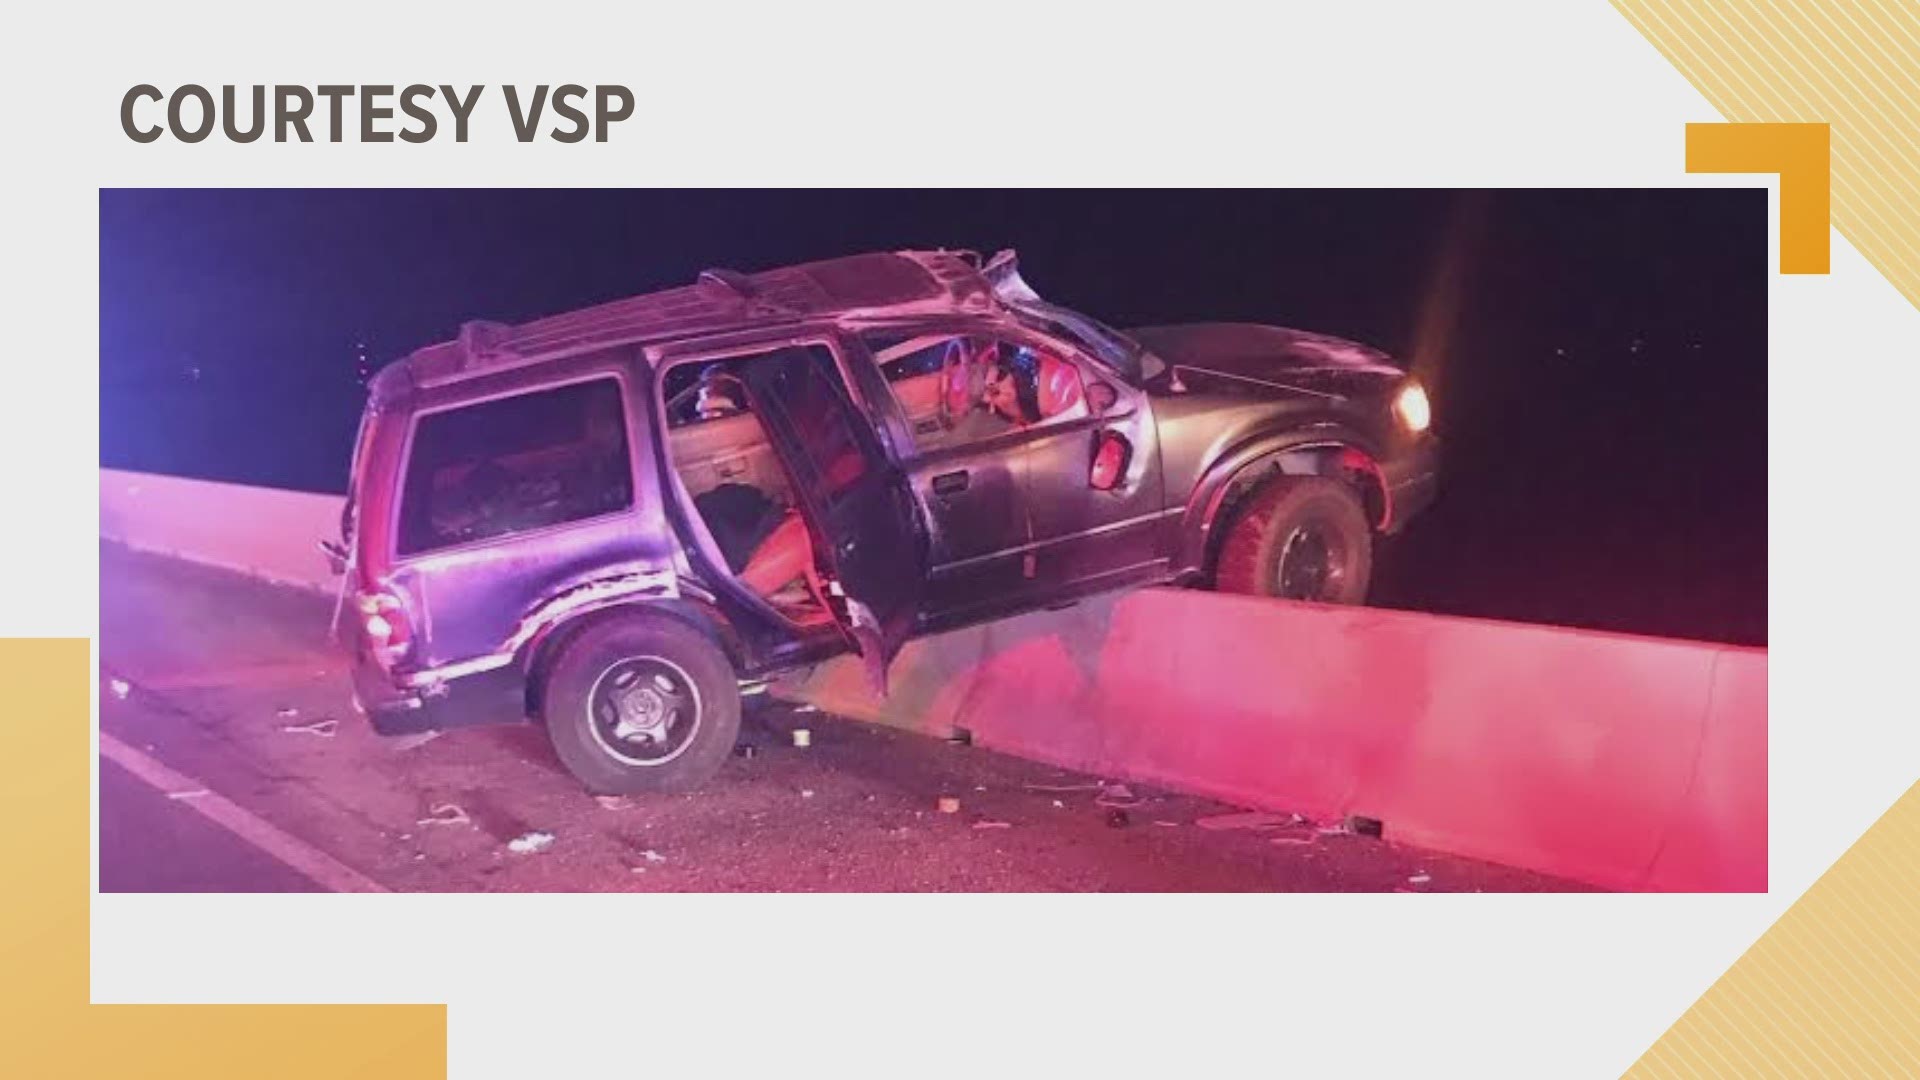 VA State Police are looking for the driver of an unknown vehicle that crashed into a Ford Escape and fled the scene, causing that driver to run into a bridge wall.